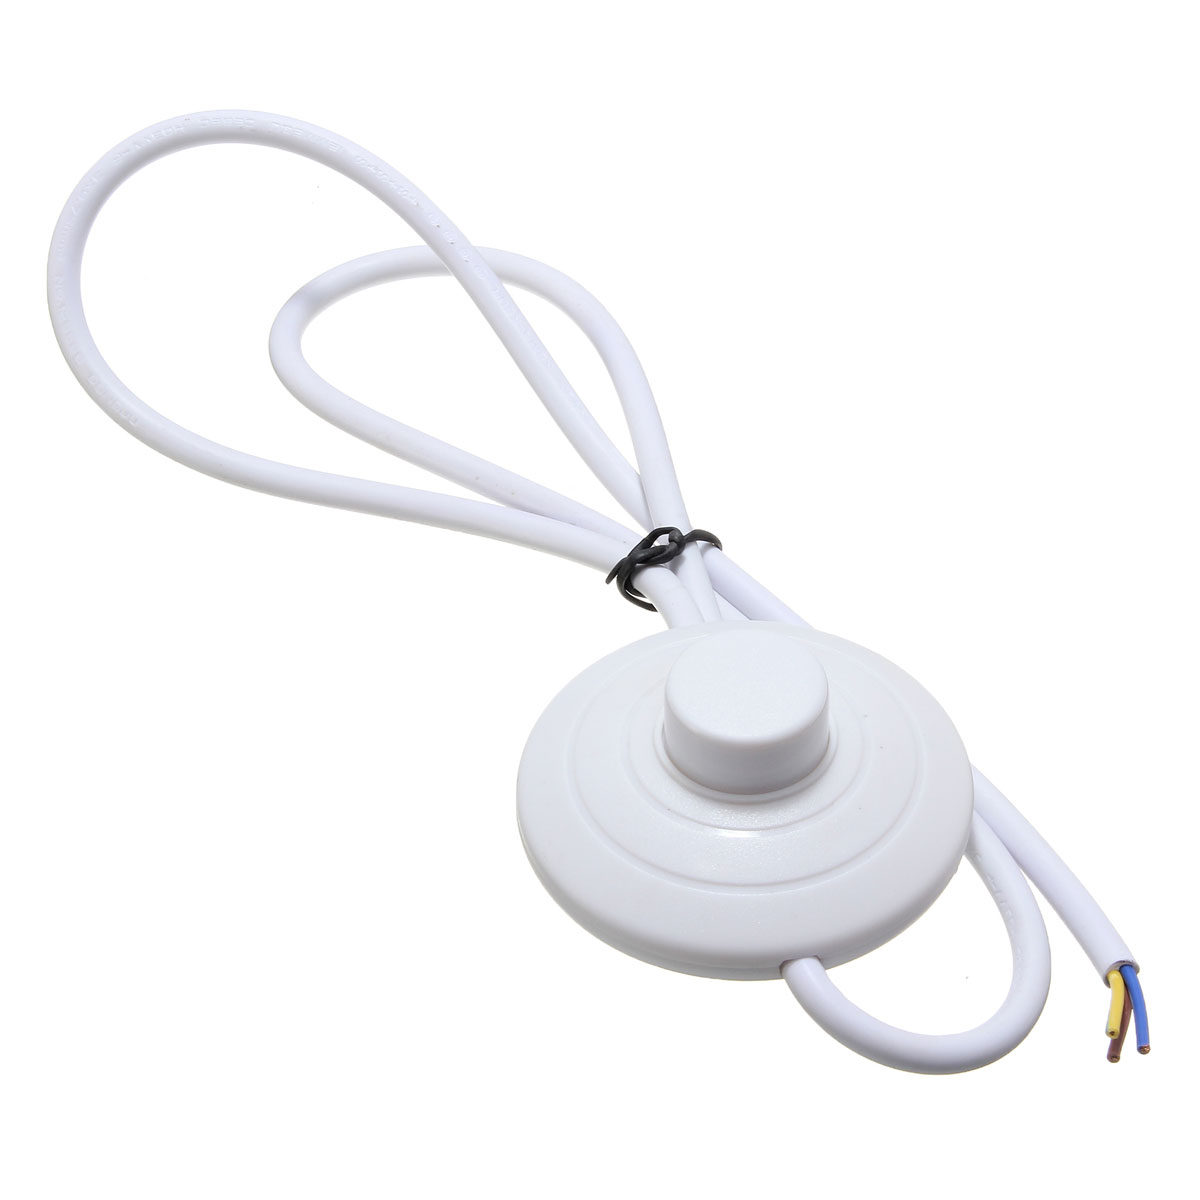 1M-Circular-Lighting-Button-Switch-with-3-Core-Inline-Flex-Cord-for-Table-Desk-Lamp-1271121